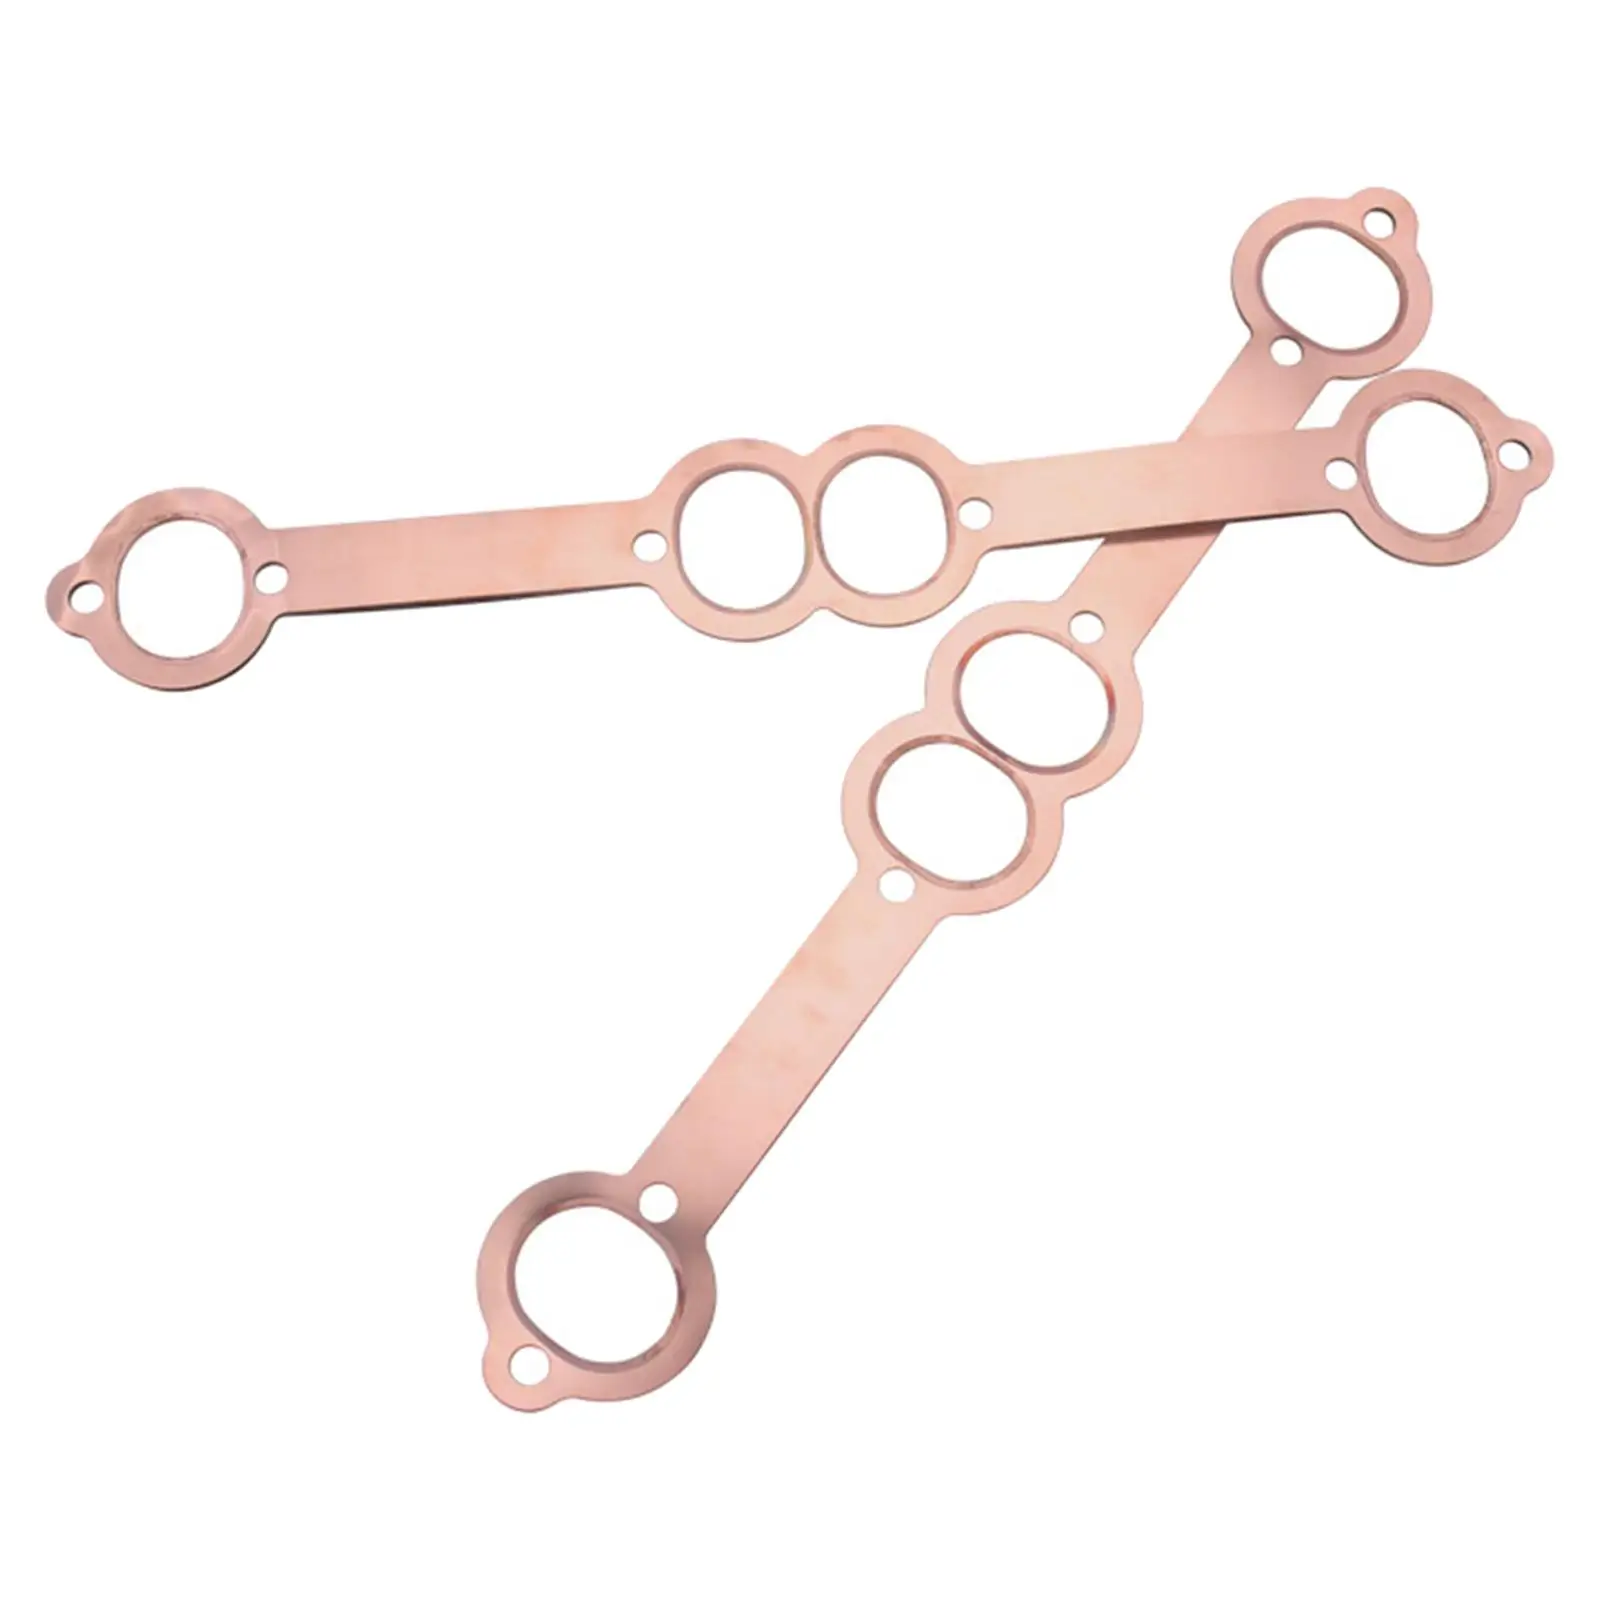 2 Pieces Car Oval Port Sbc Copper Header Exhaust Gaskets, Reusable for